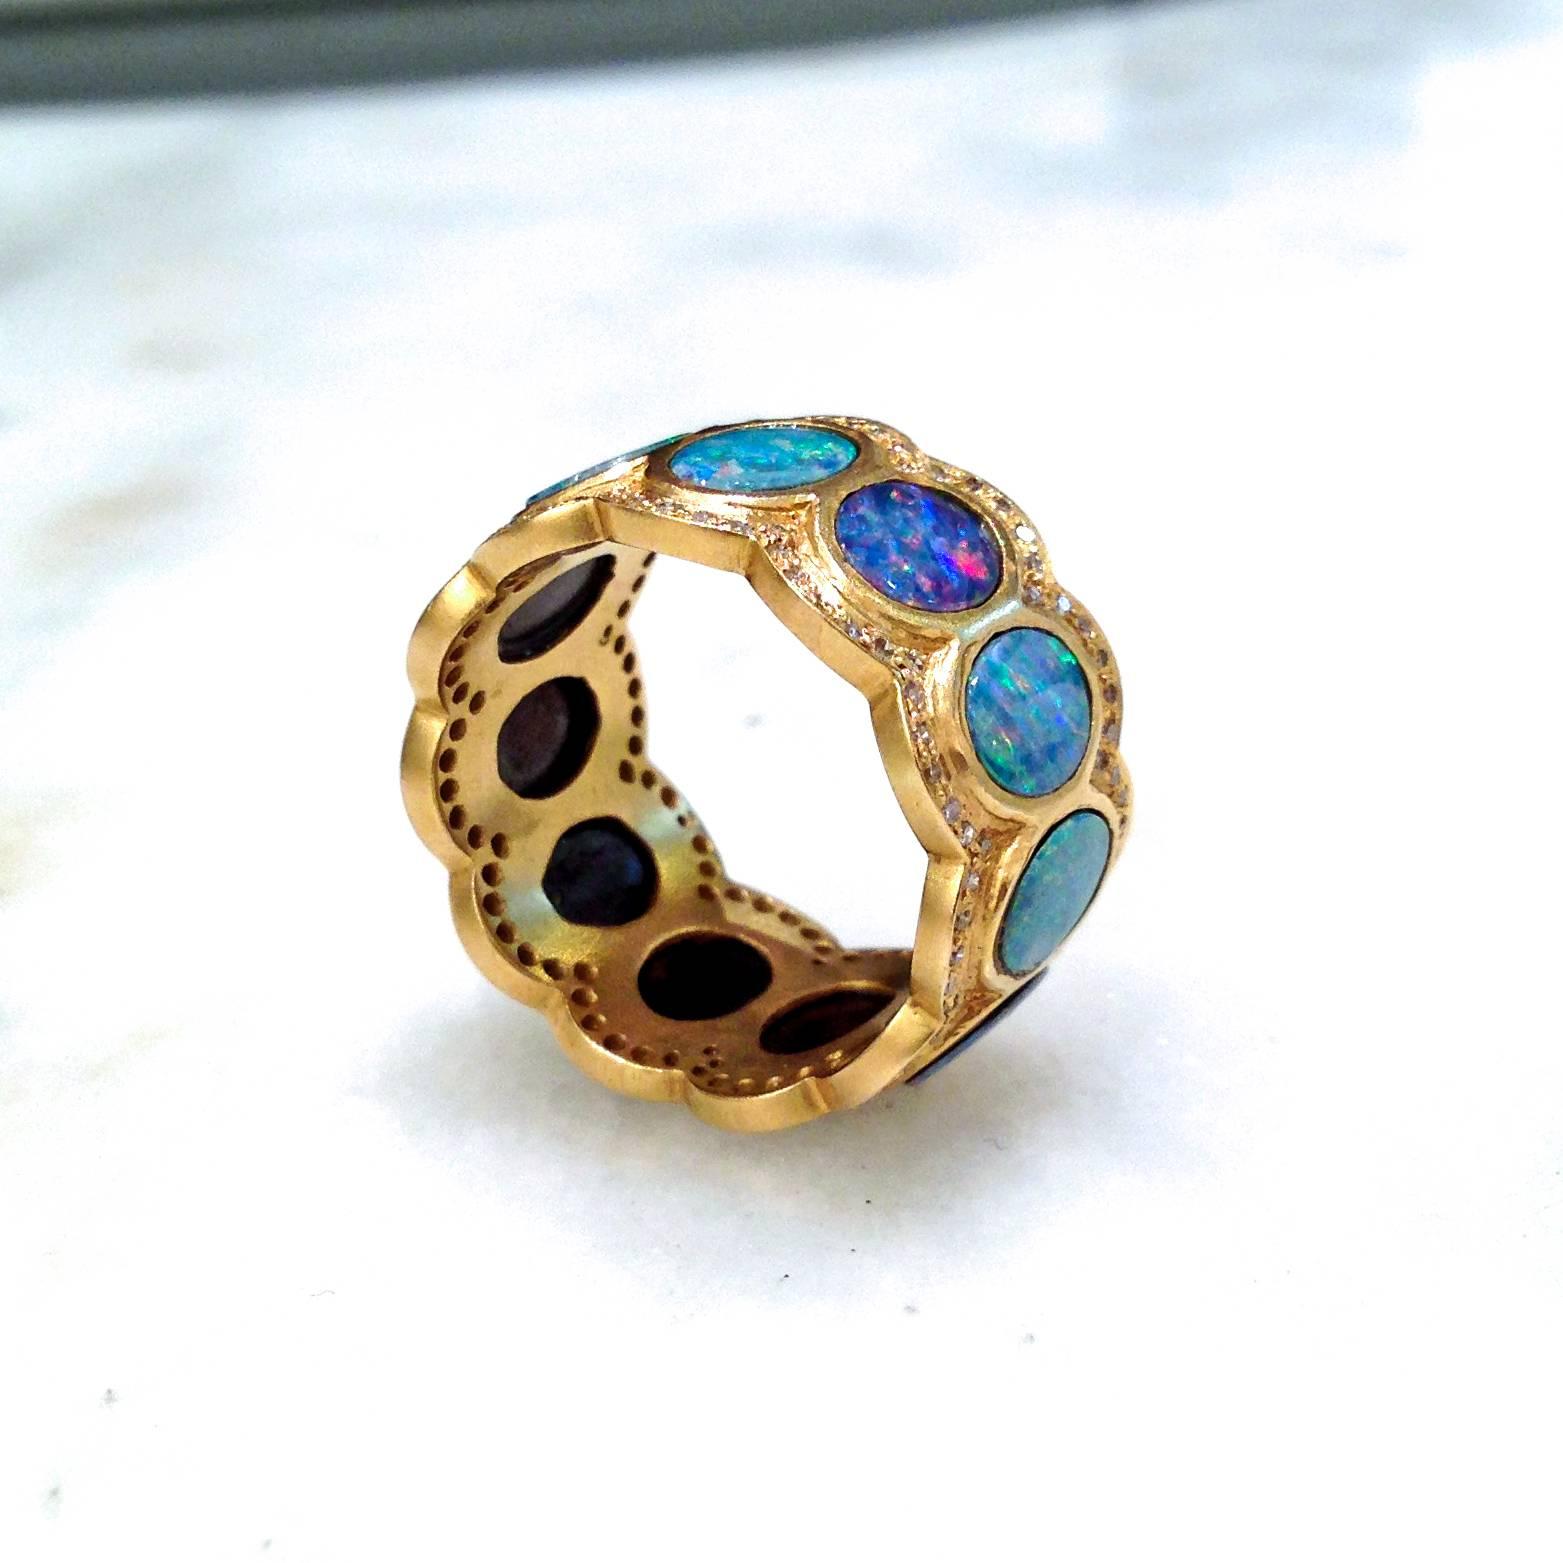 Eternity Band handcrafted in matte-finished 18k yellow gold with oval boulder opal discs surrounded by two rows of round brilliant-cut white diamonds. Size 7.0 (Can be ordered in alternative size).